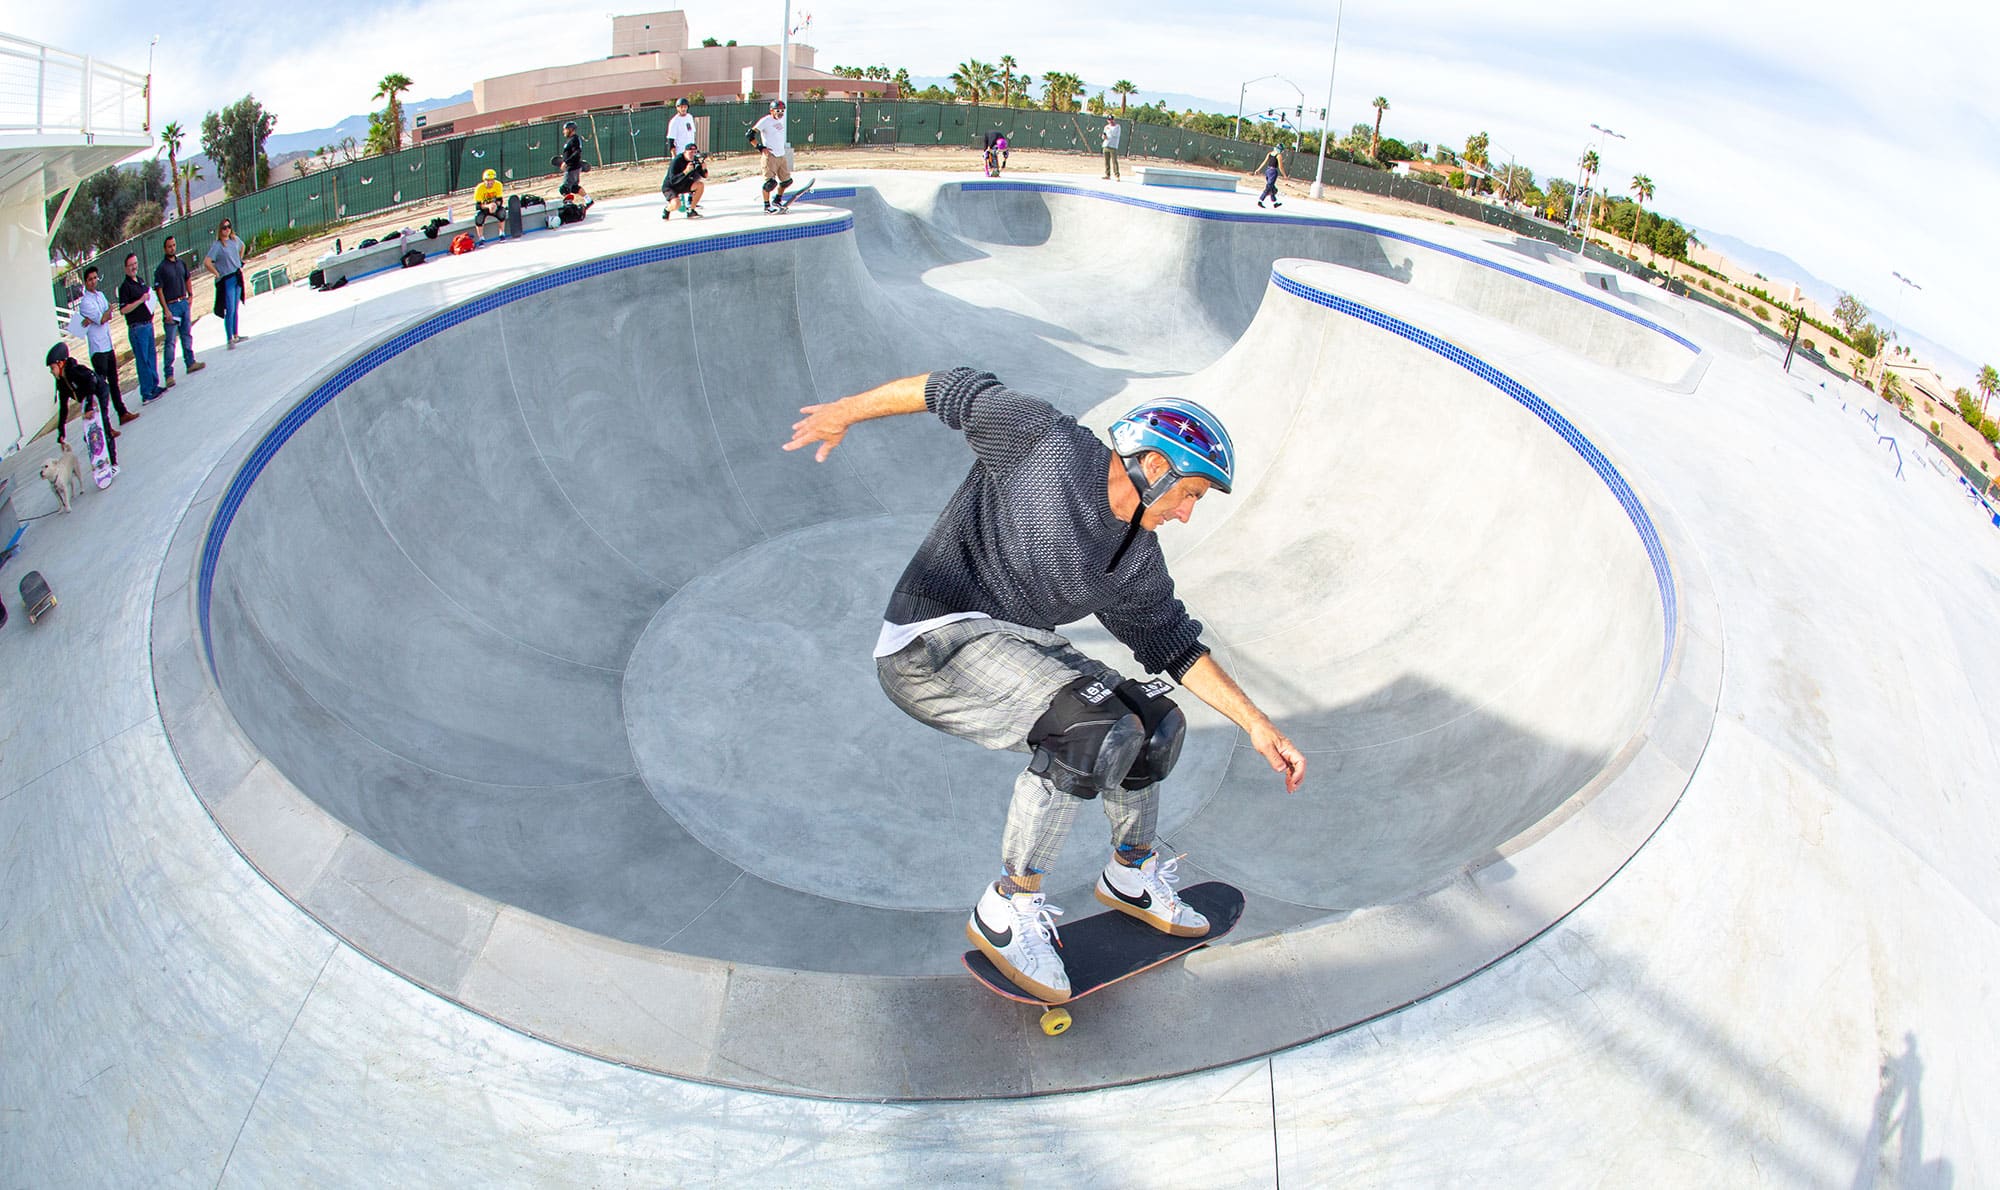 Nothing more stylish Smith Grind by Lance Mountain in the Combi bowl designed and built by Spohn Ranch